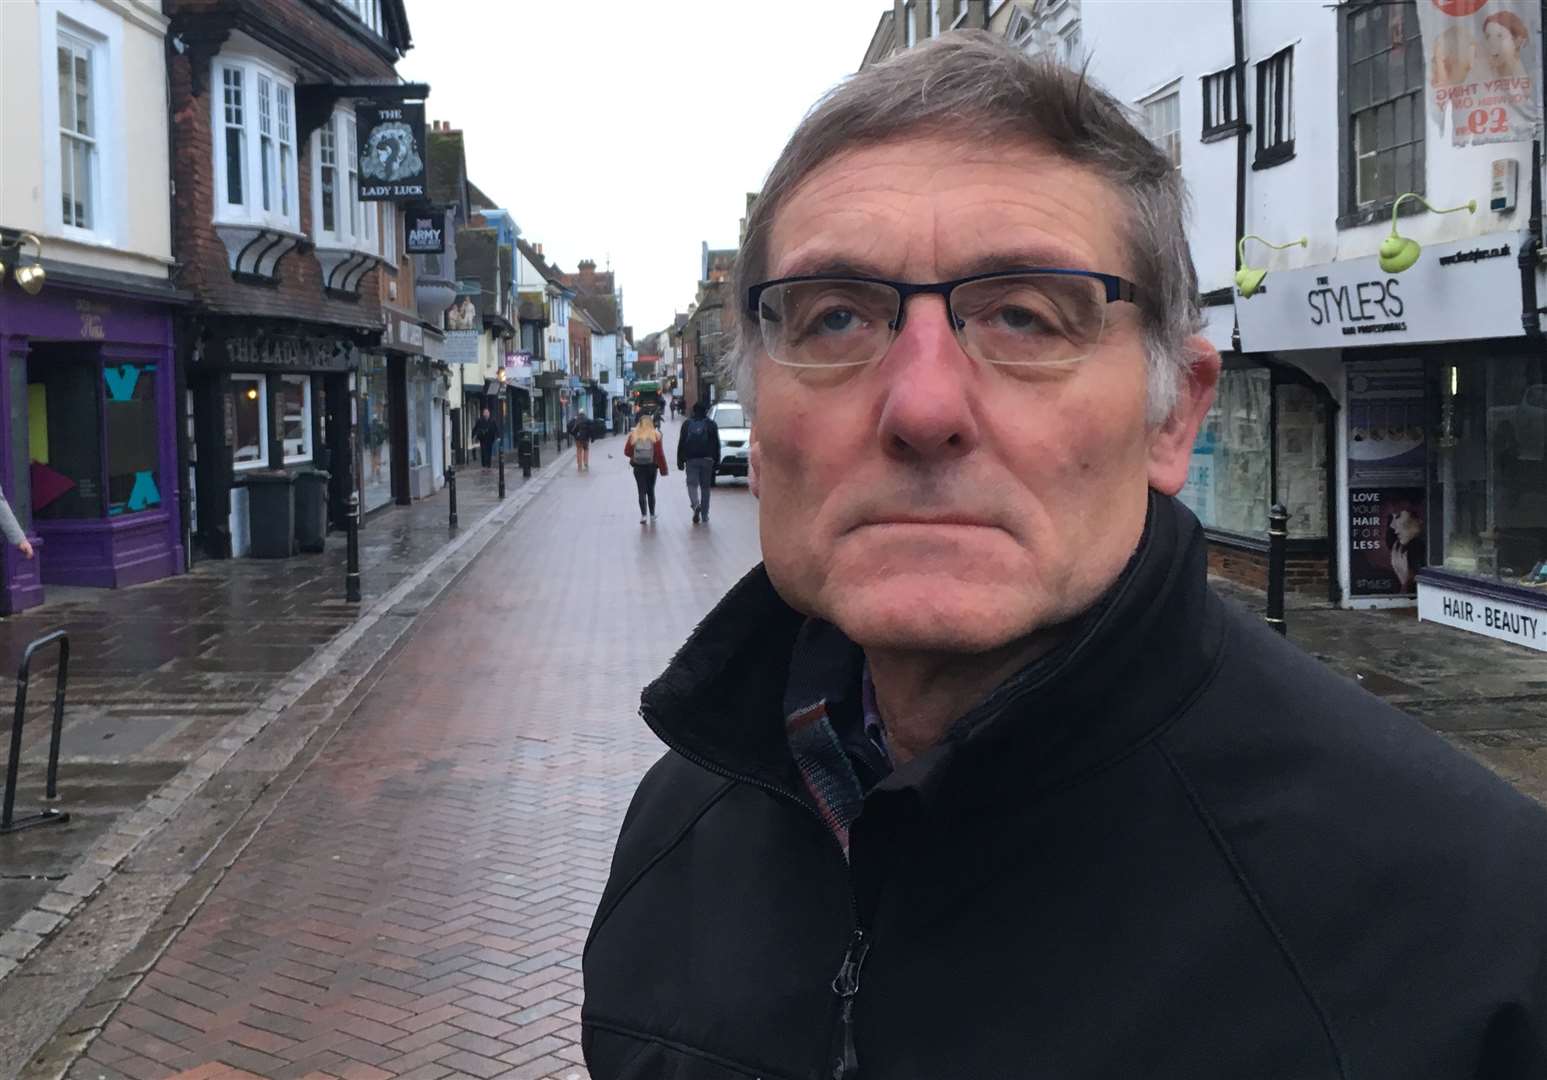 Canterbury's Labour leader and new council leader, Alan Baldock